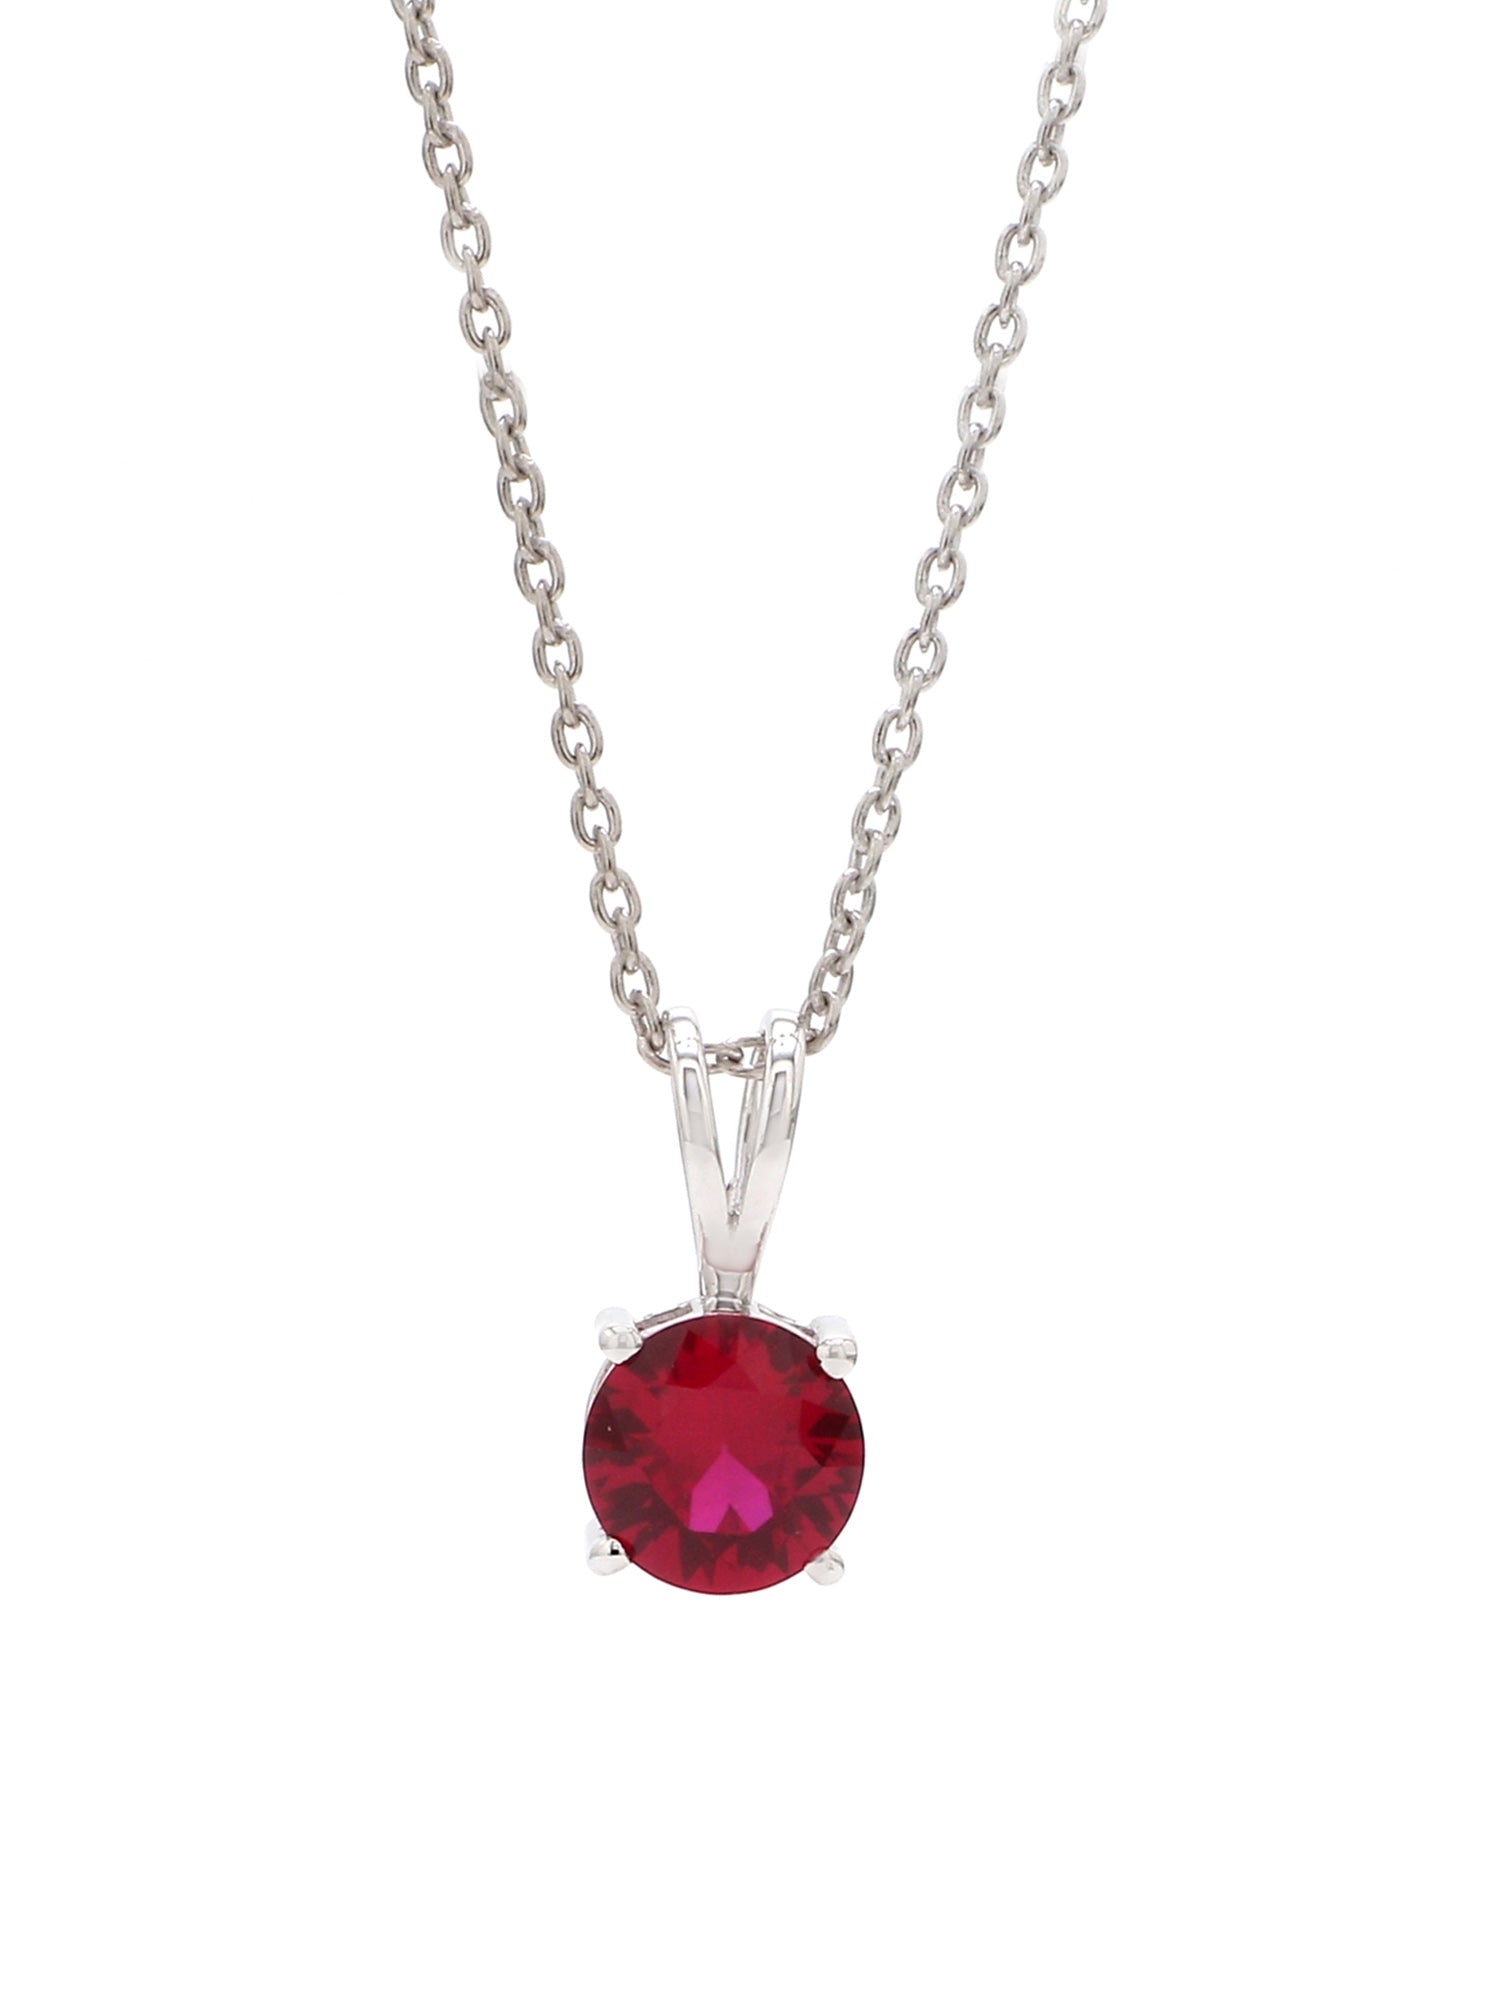 DAILY WEAR RUBY SOLITAIRE PENDANT